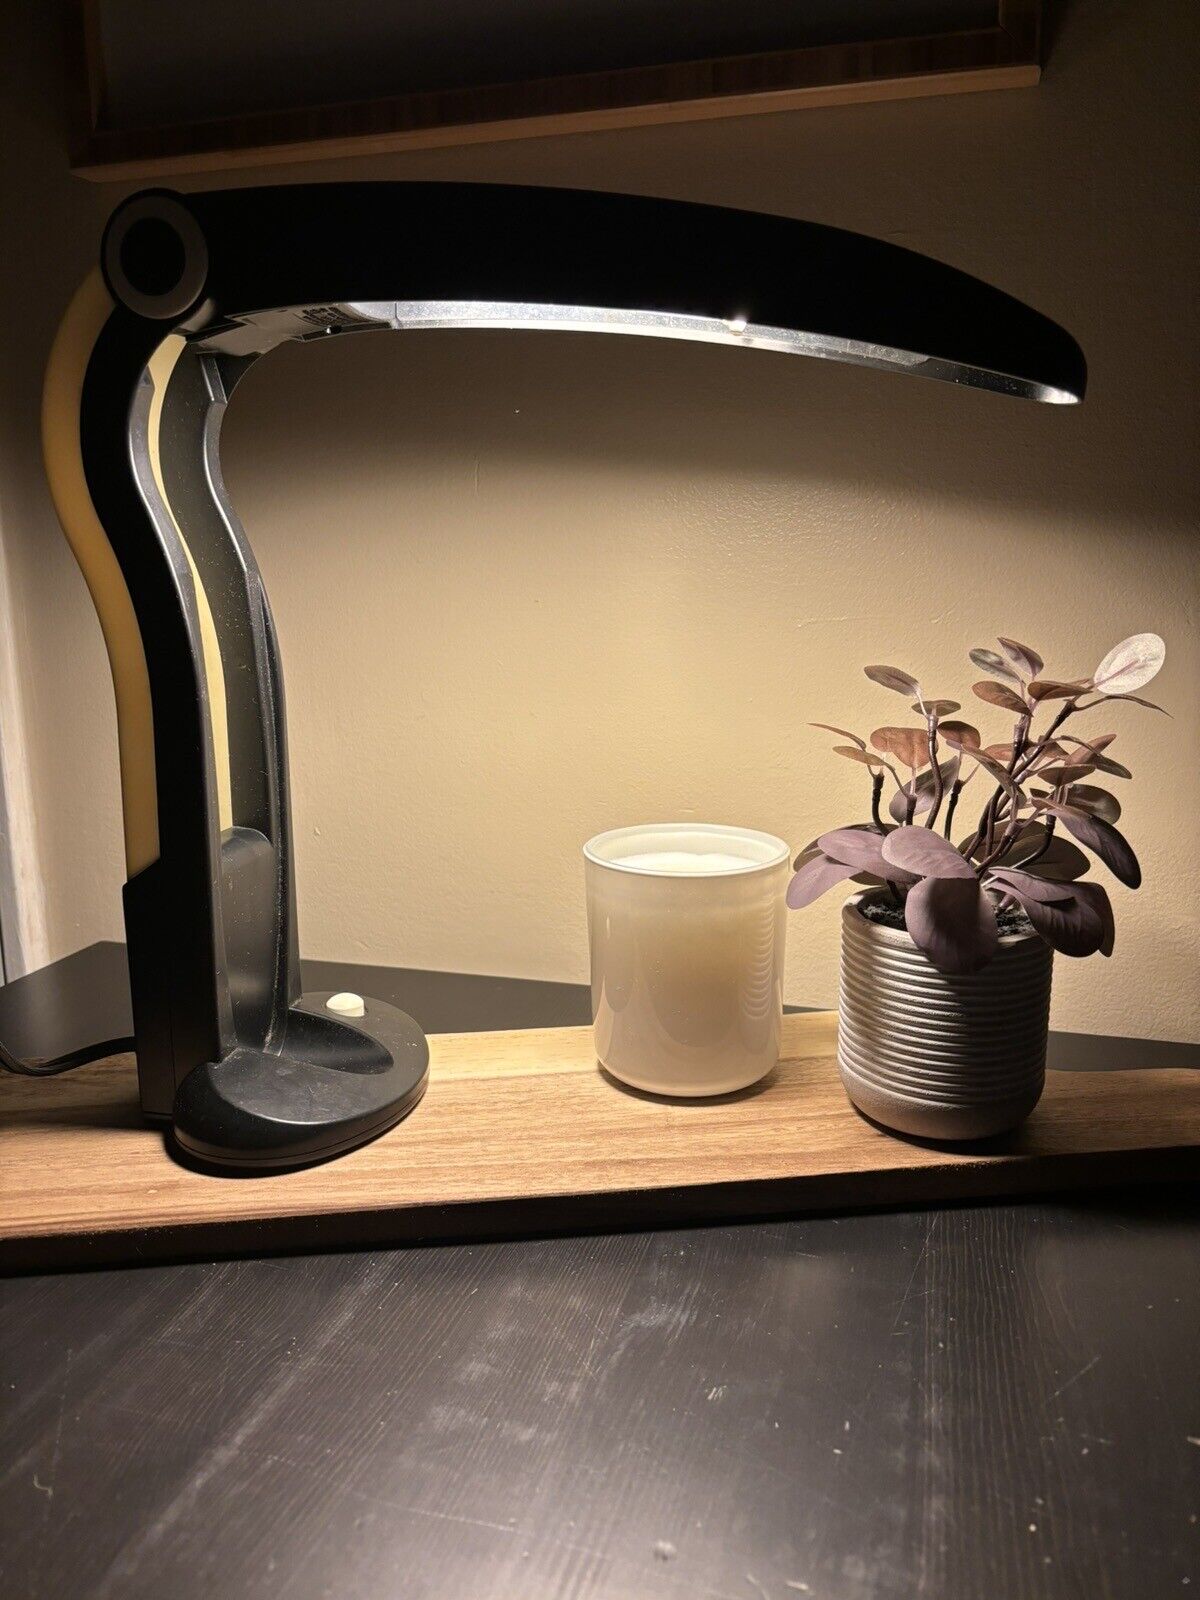 Black Toucan Lamp by H.T. Huang for Desk or Table - Rare collectible lighting